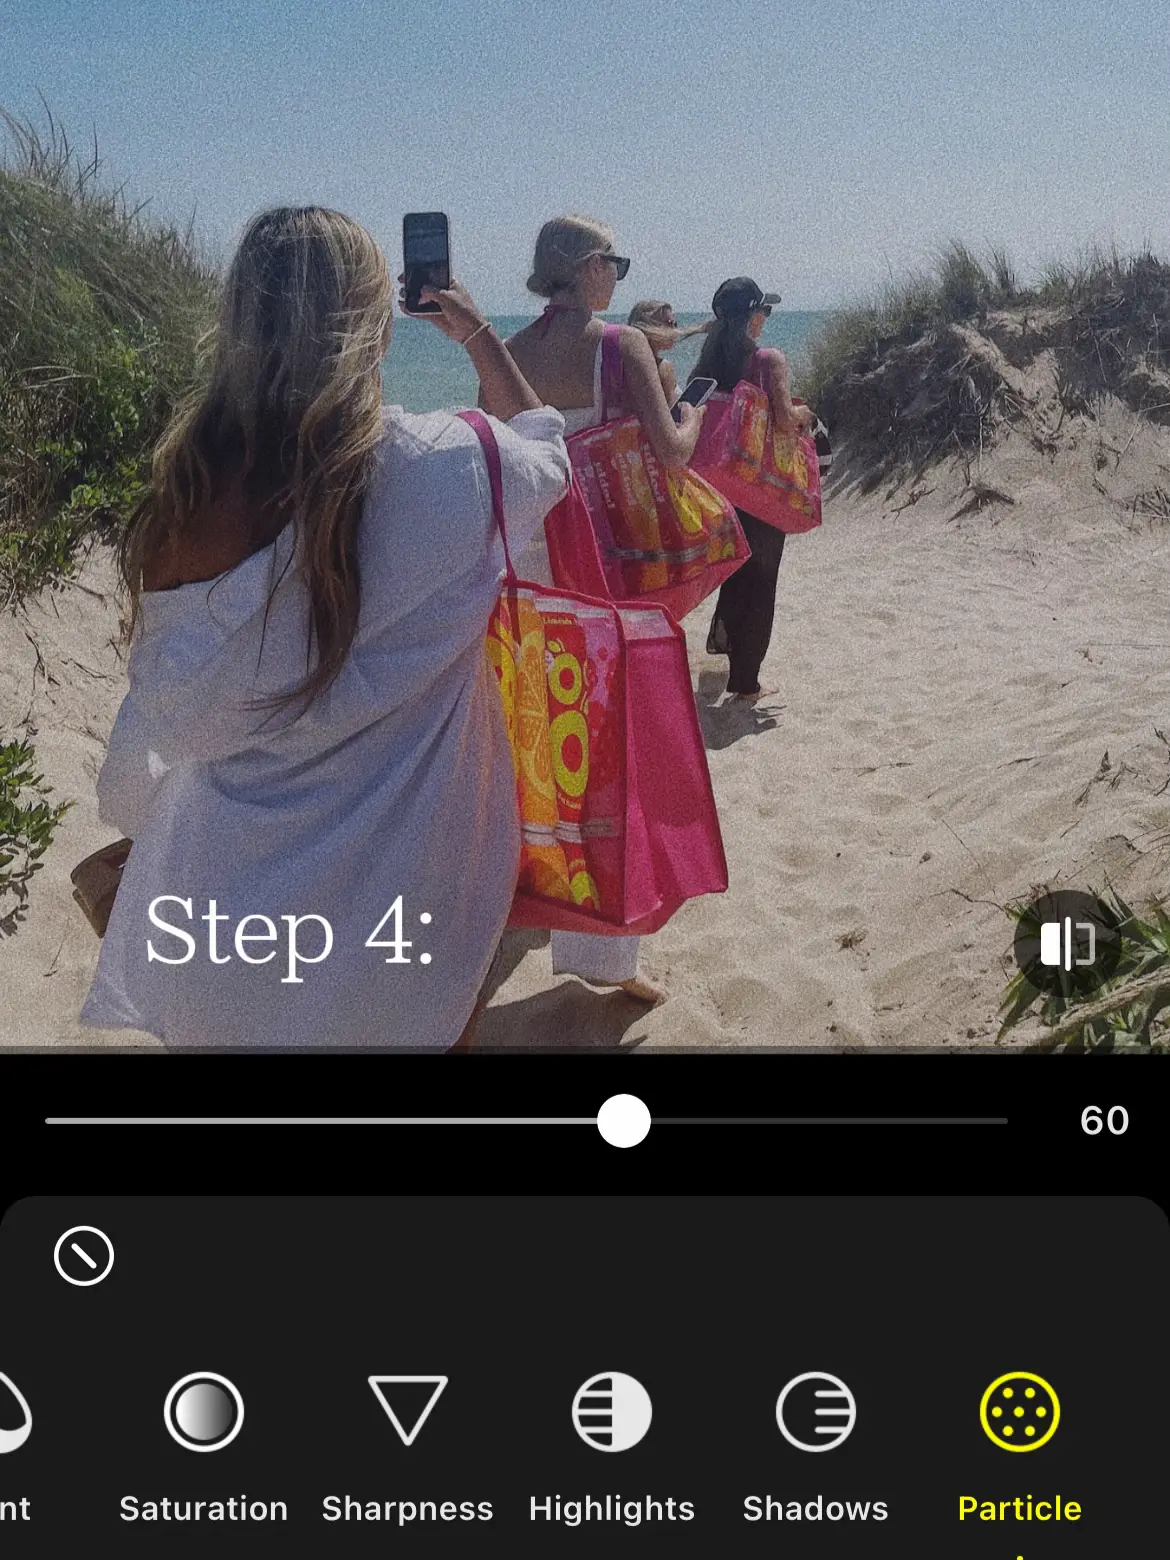  Three women are walking on a beach, with two of them holding bags. The image is taken at a 60 degree angle.